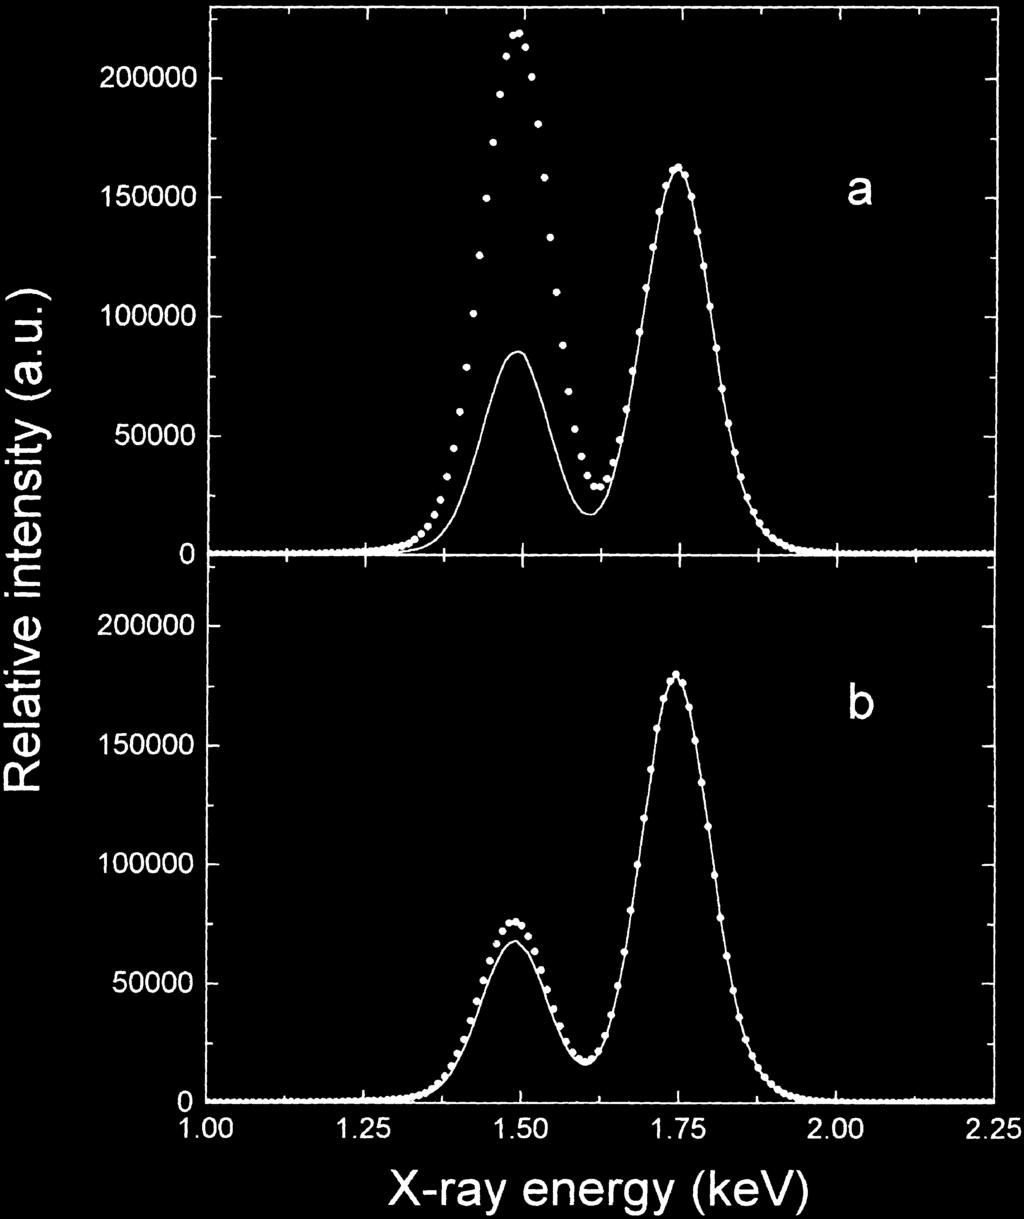 Cumulative KX-ray spectra observed from sputter targets T1 (a) and T2 (b) during the mapping: the solid line spectra correspond to a mapping in the sputtered track while the dotted spectra are due to